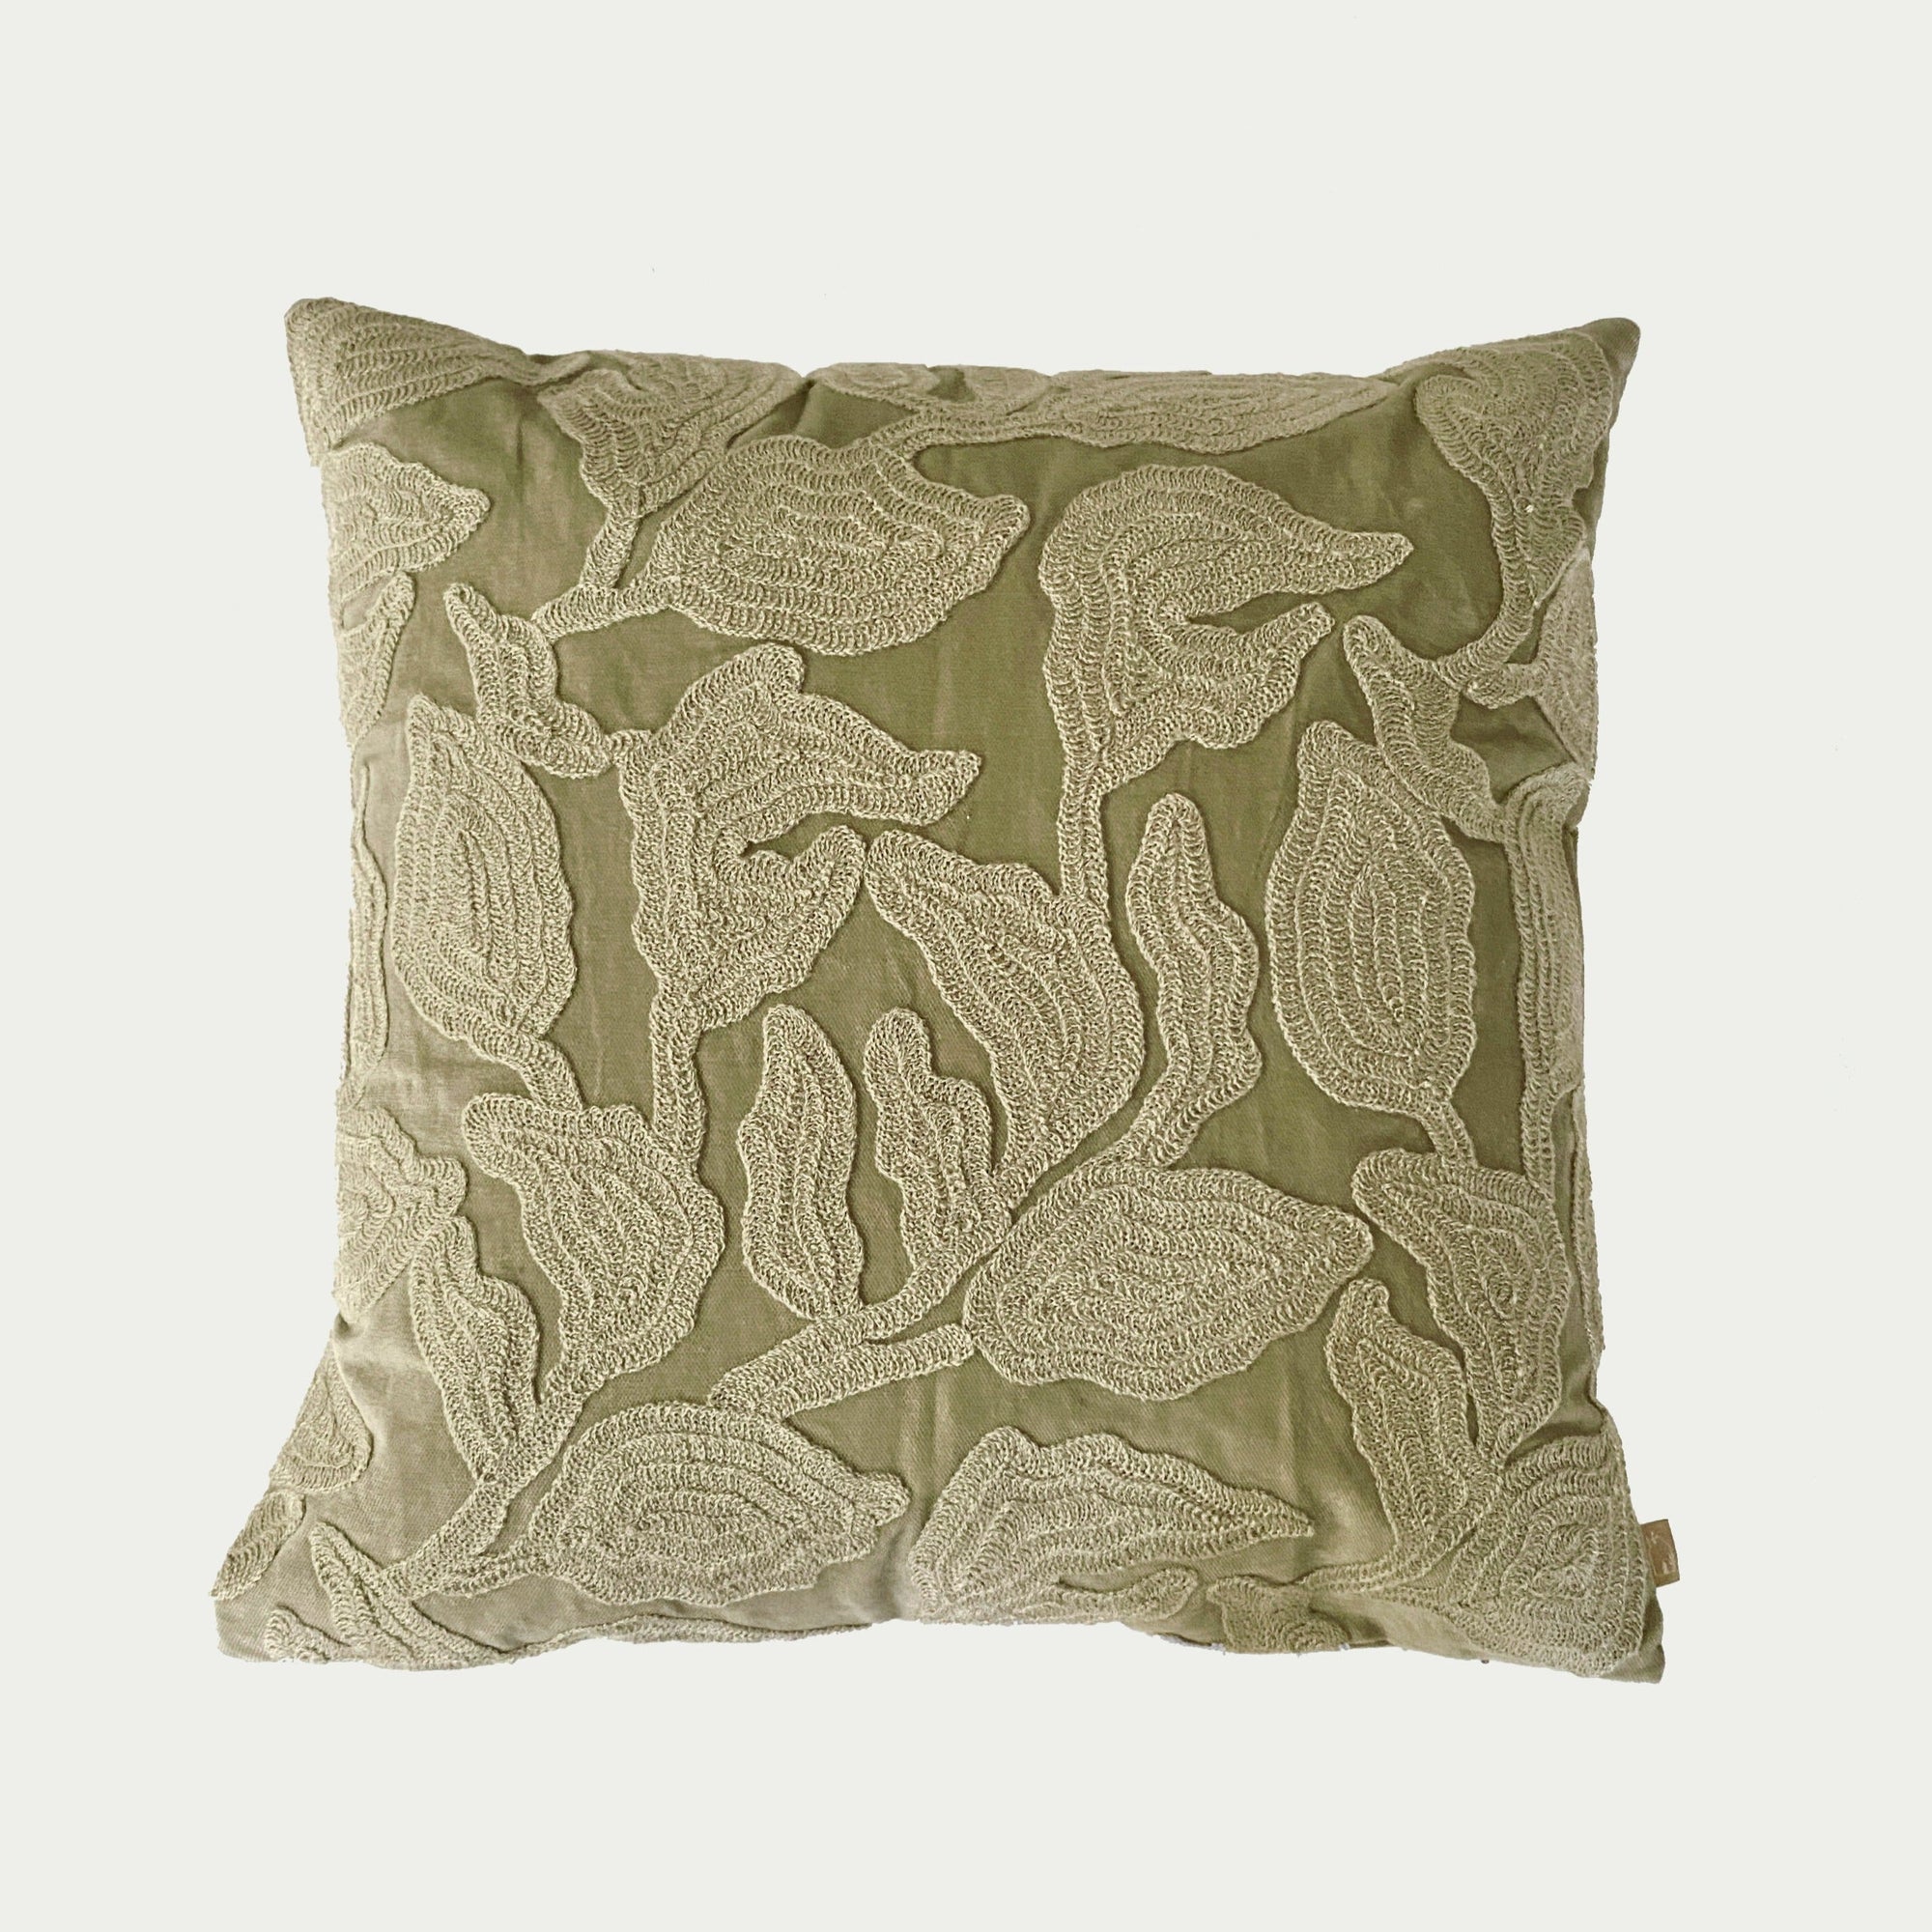 Cascade Embroidered Fern Cushion Cover by Sanctuary Living - Home Artisan